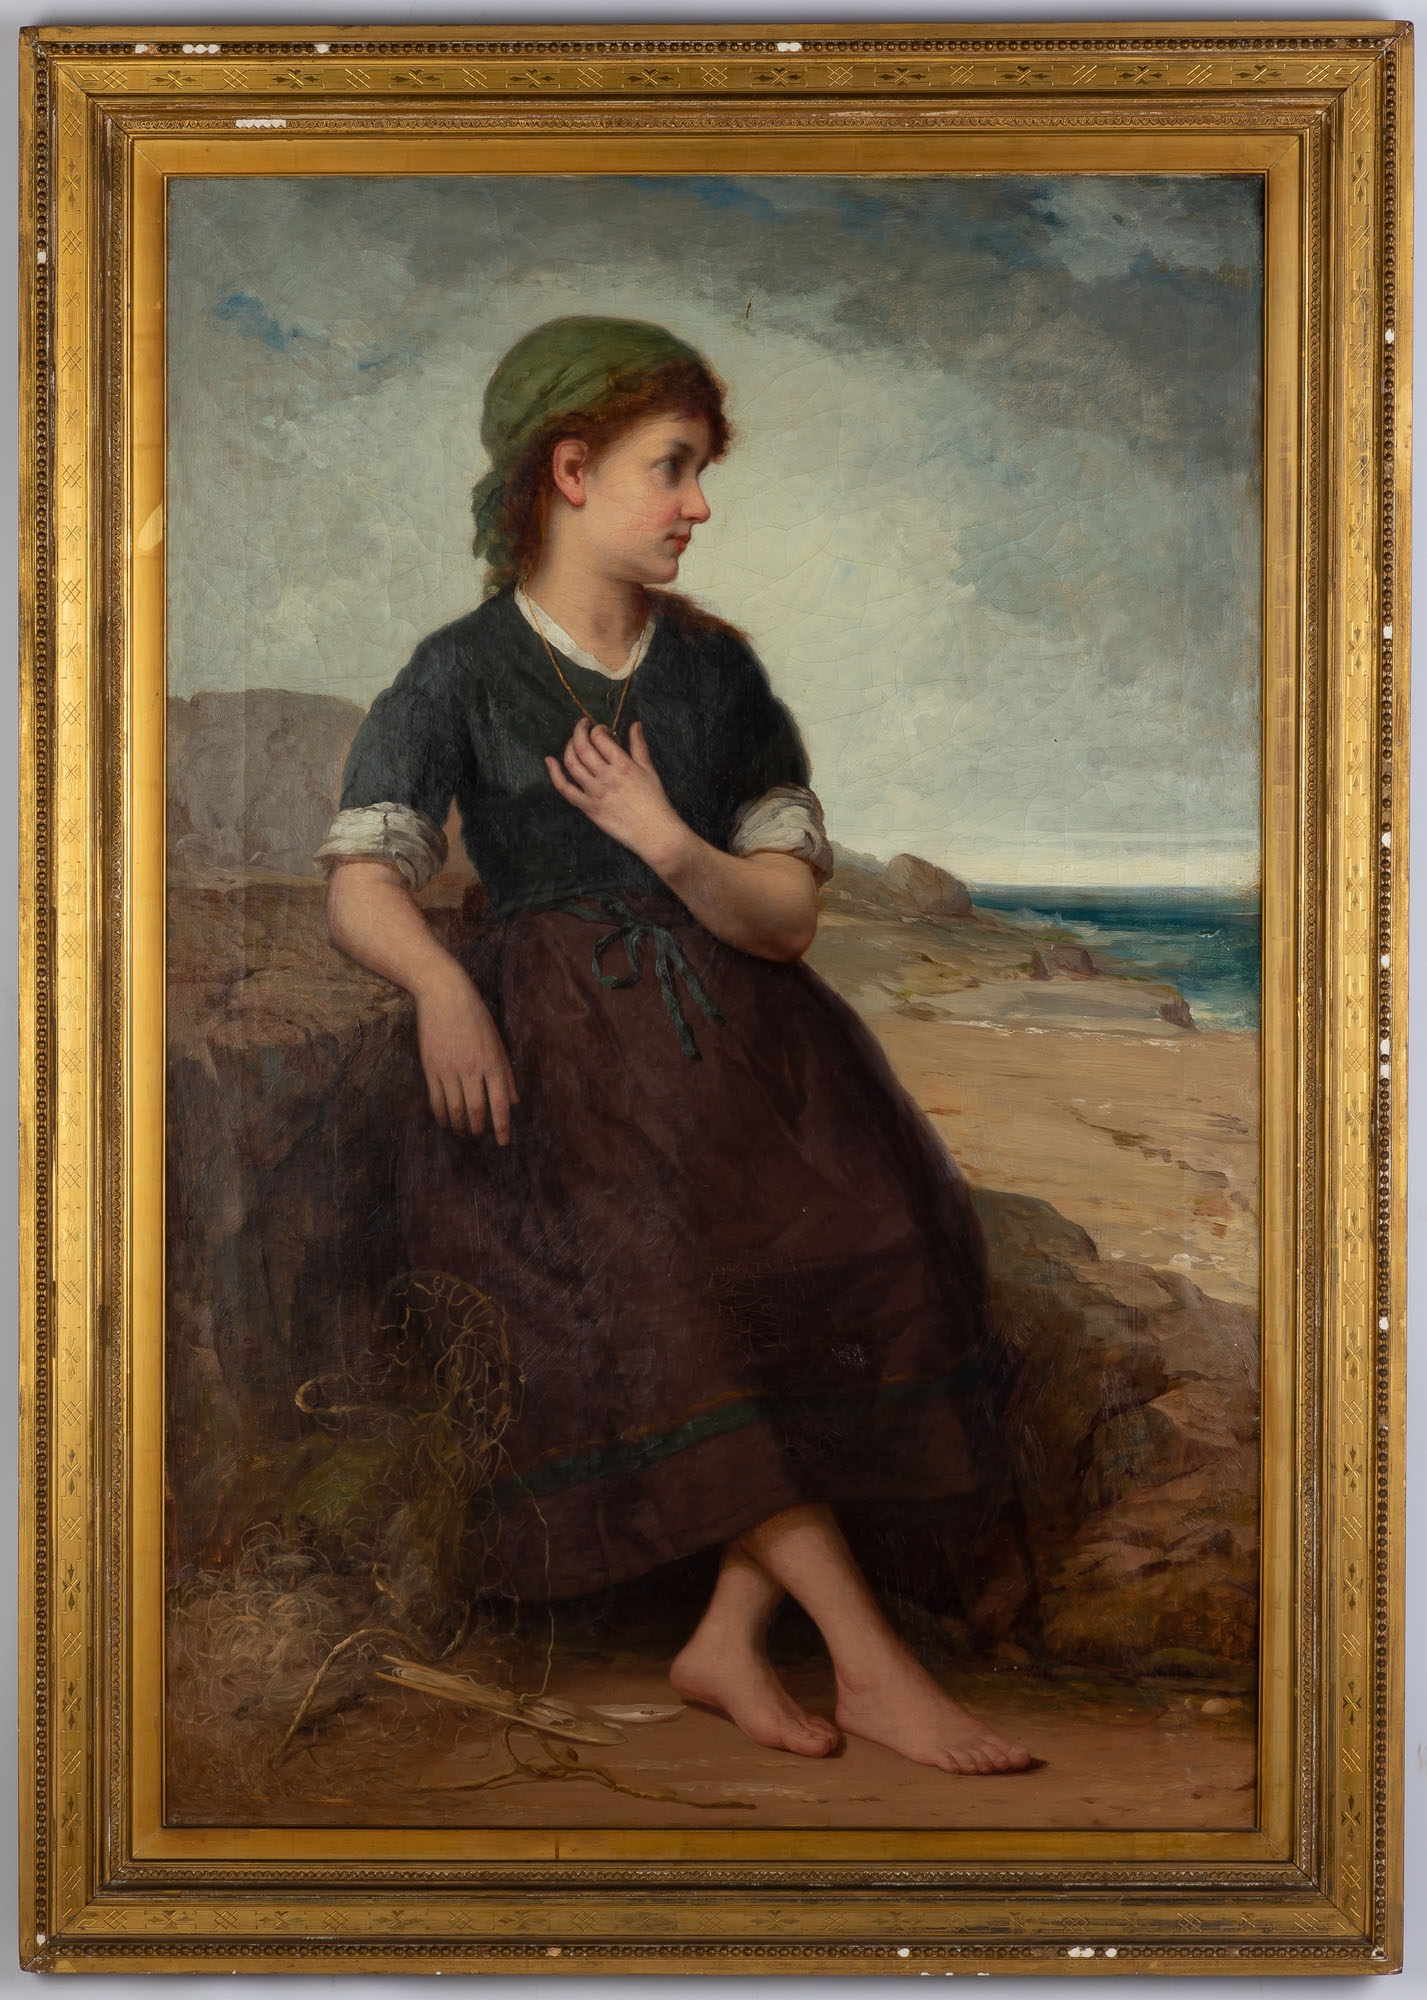 Fisher Girl by William Adolphe Bouguereau, 19th century